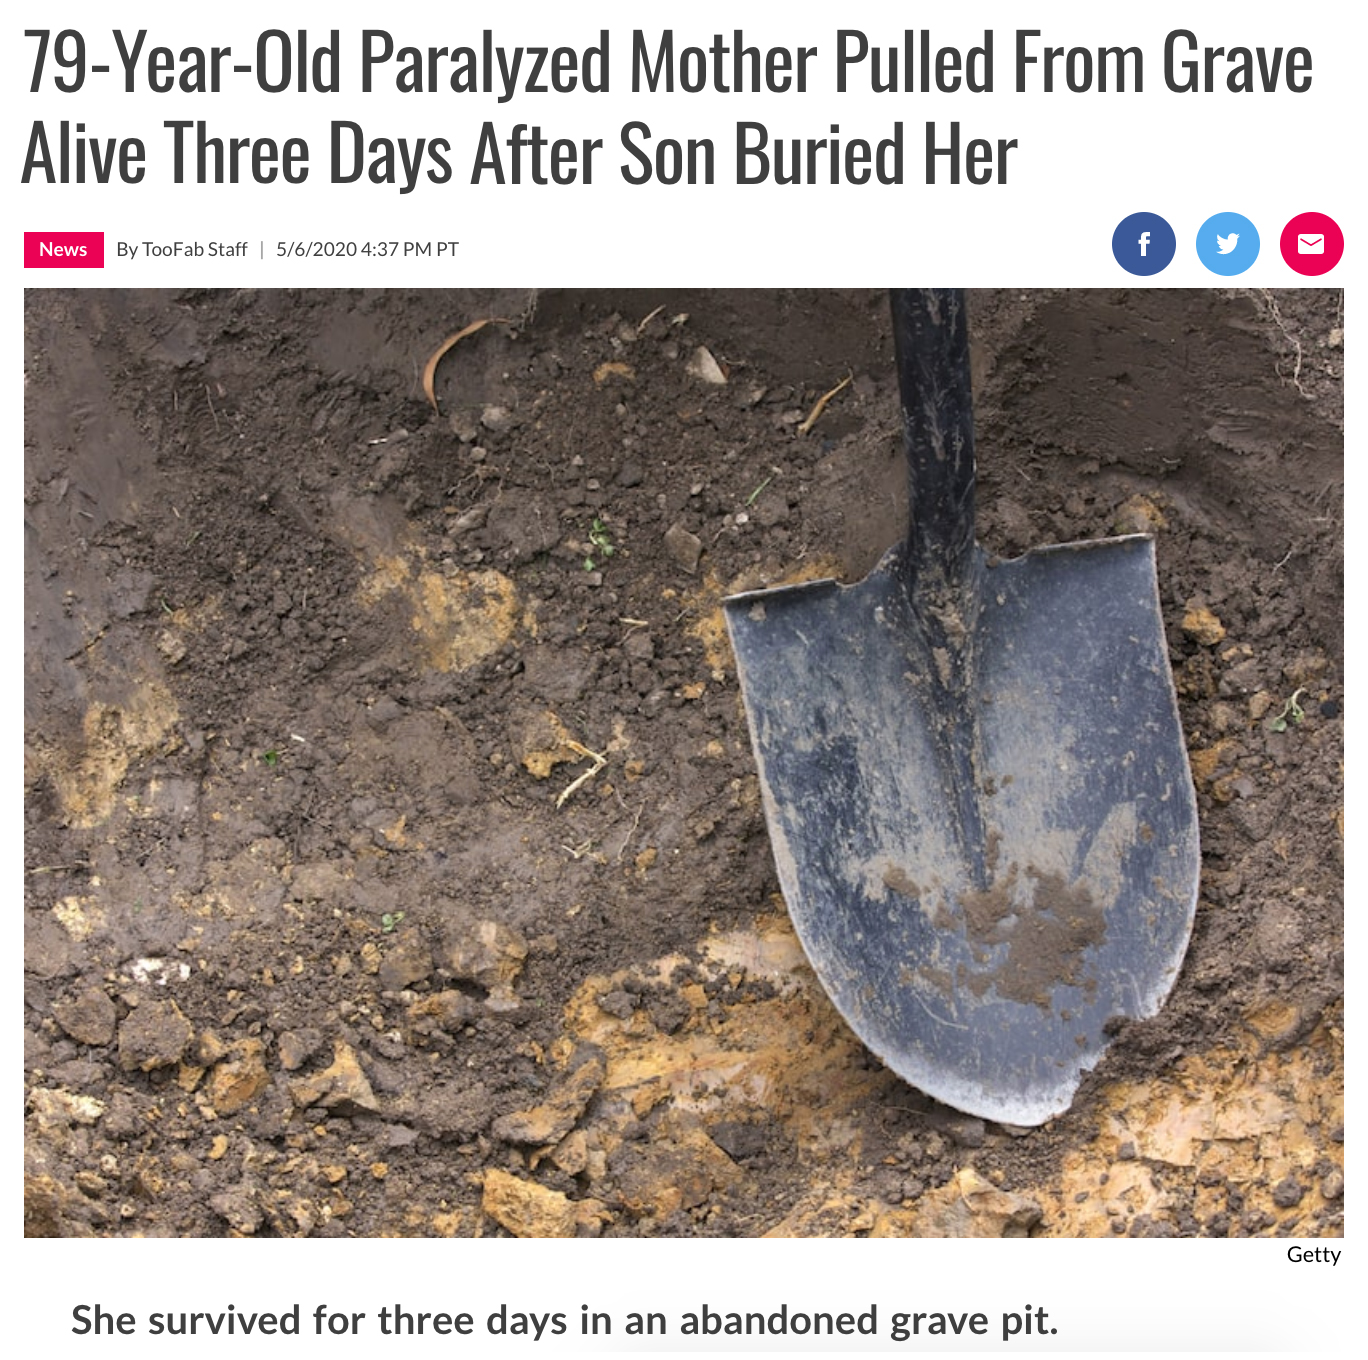 79-Year-Old Paralyzed Mother Pulled From Grave Alive Three Days After Son Buried Her She survived for three days in an abandoned grave pit.